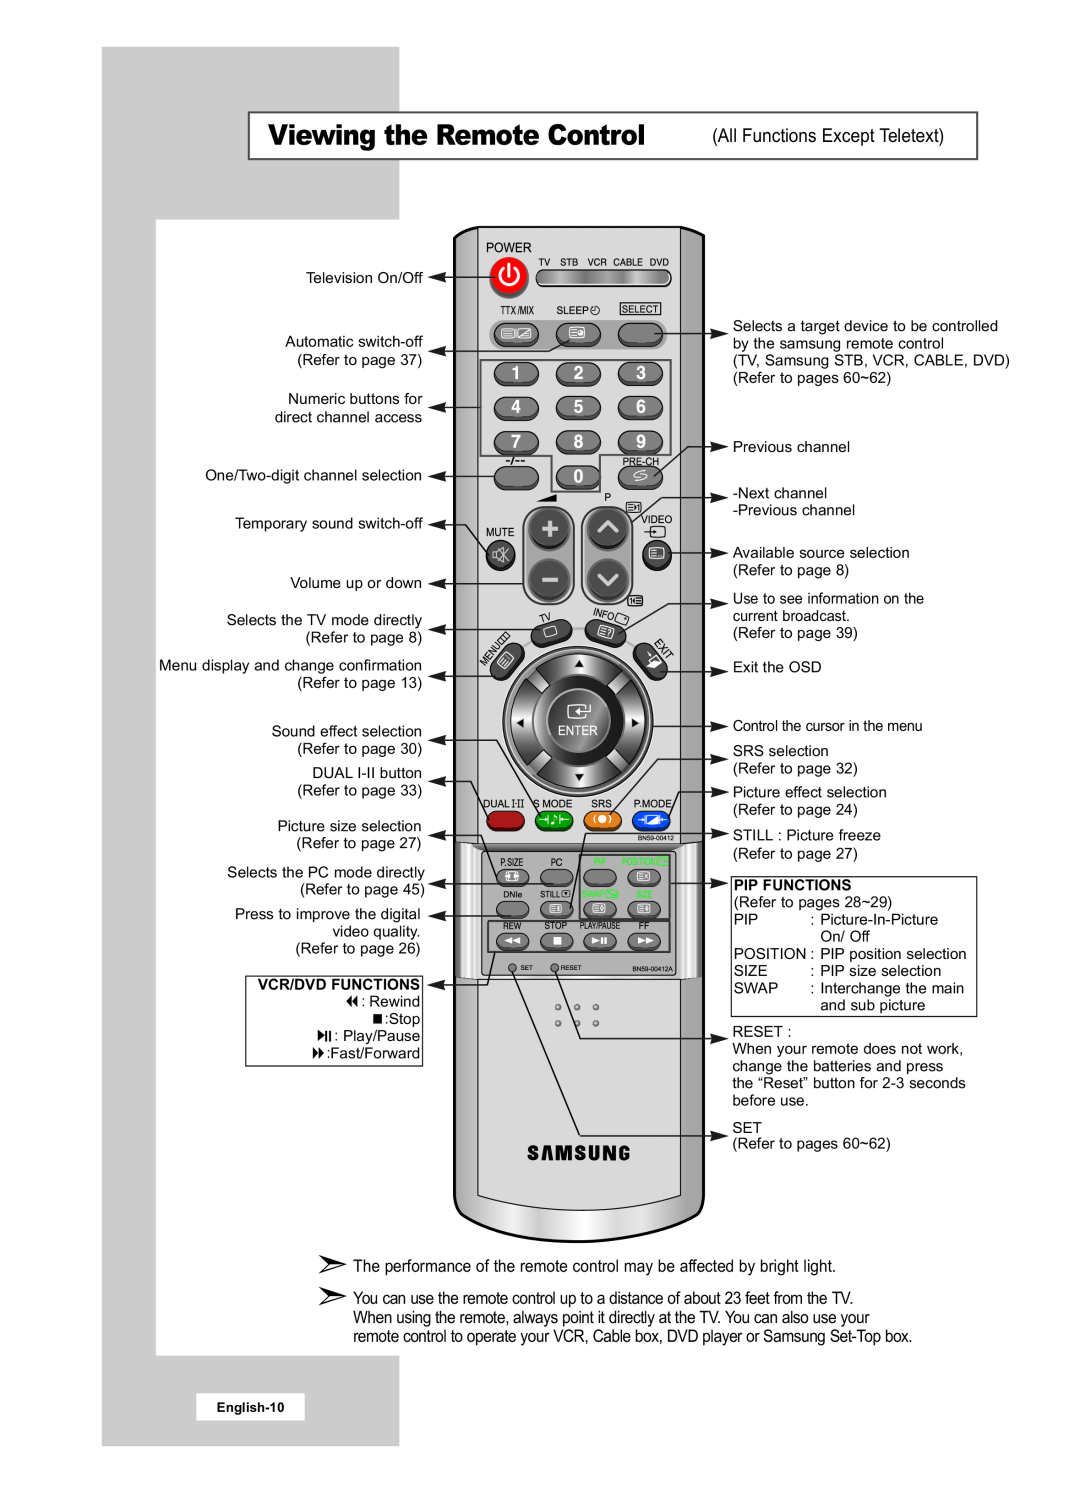 Samsung LA22N21B manual Viewing the Remote Control, All Functions Except Teletext, Pip Functions, Vcr/Dvd Functions 